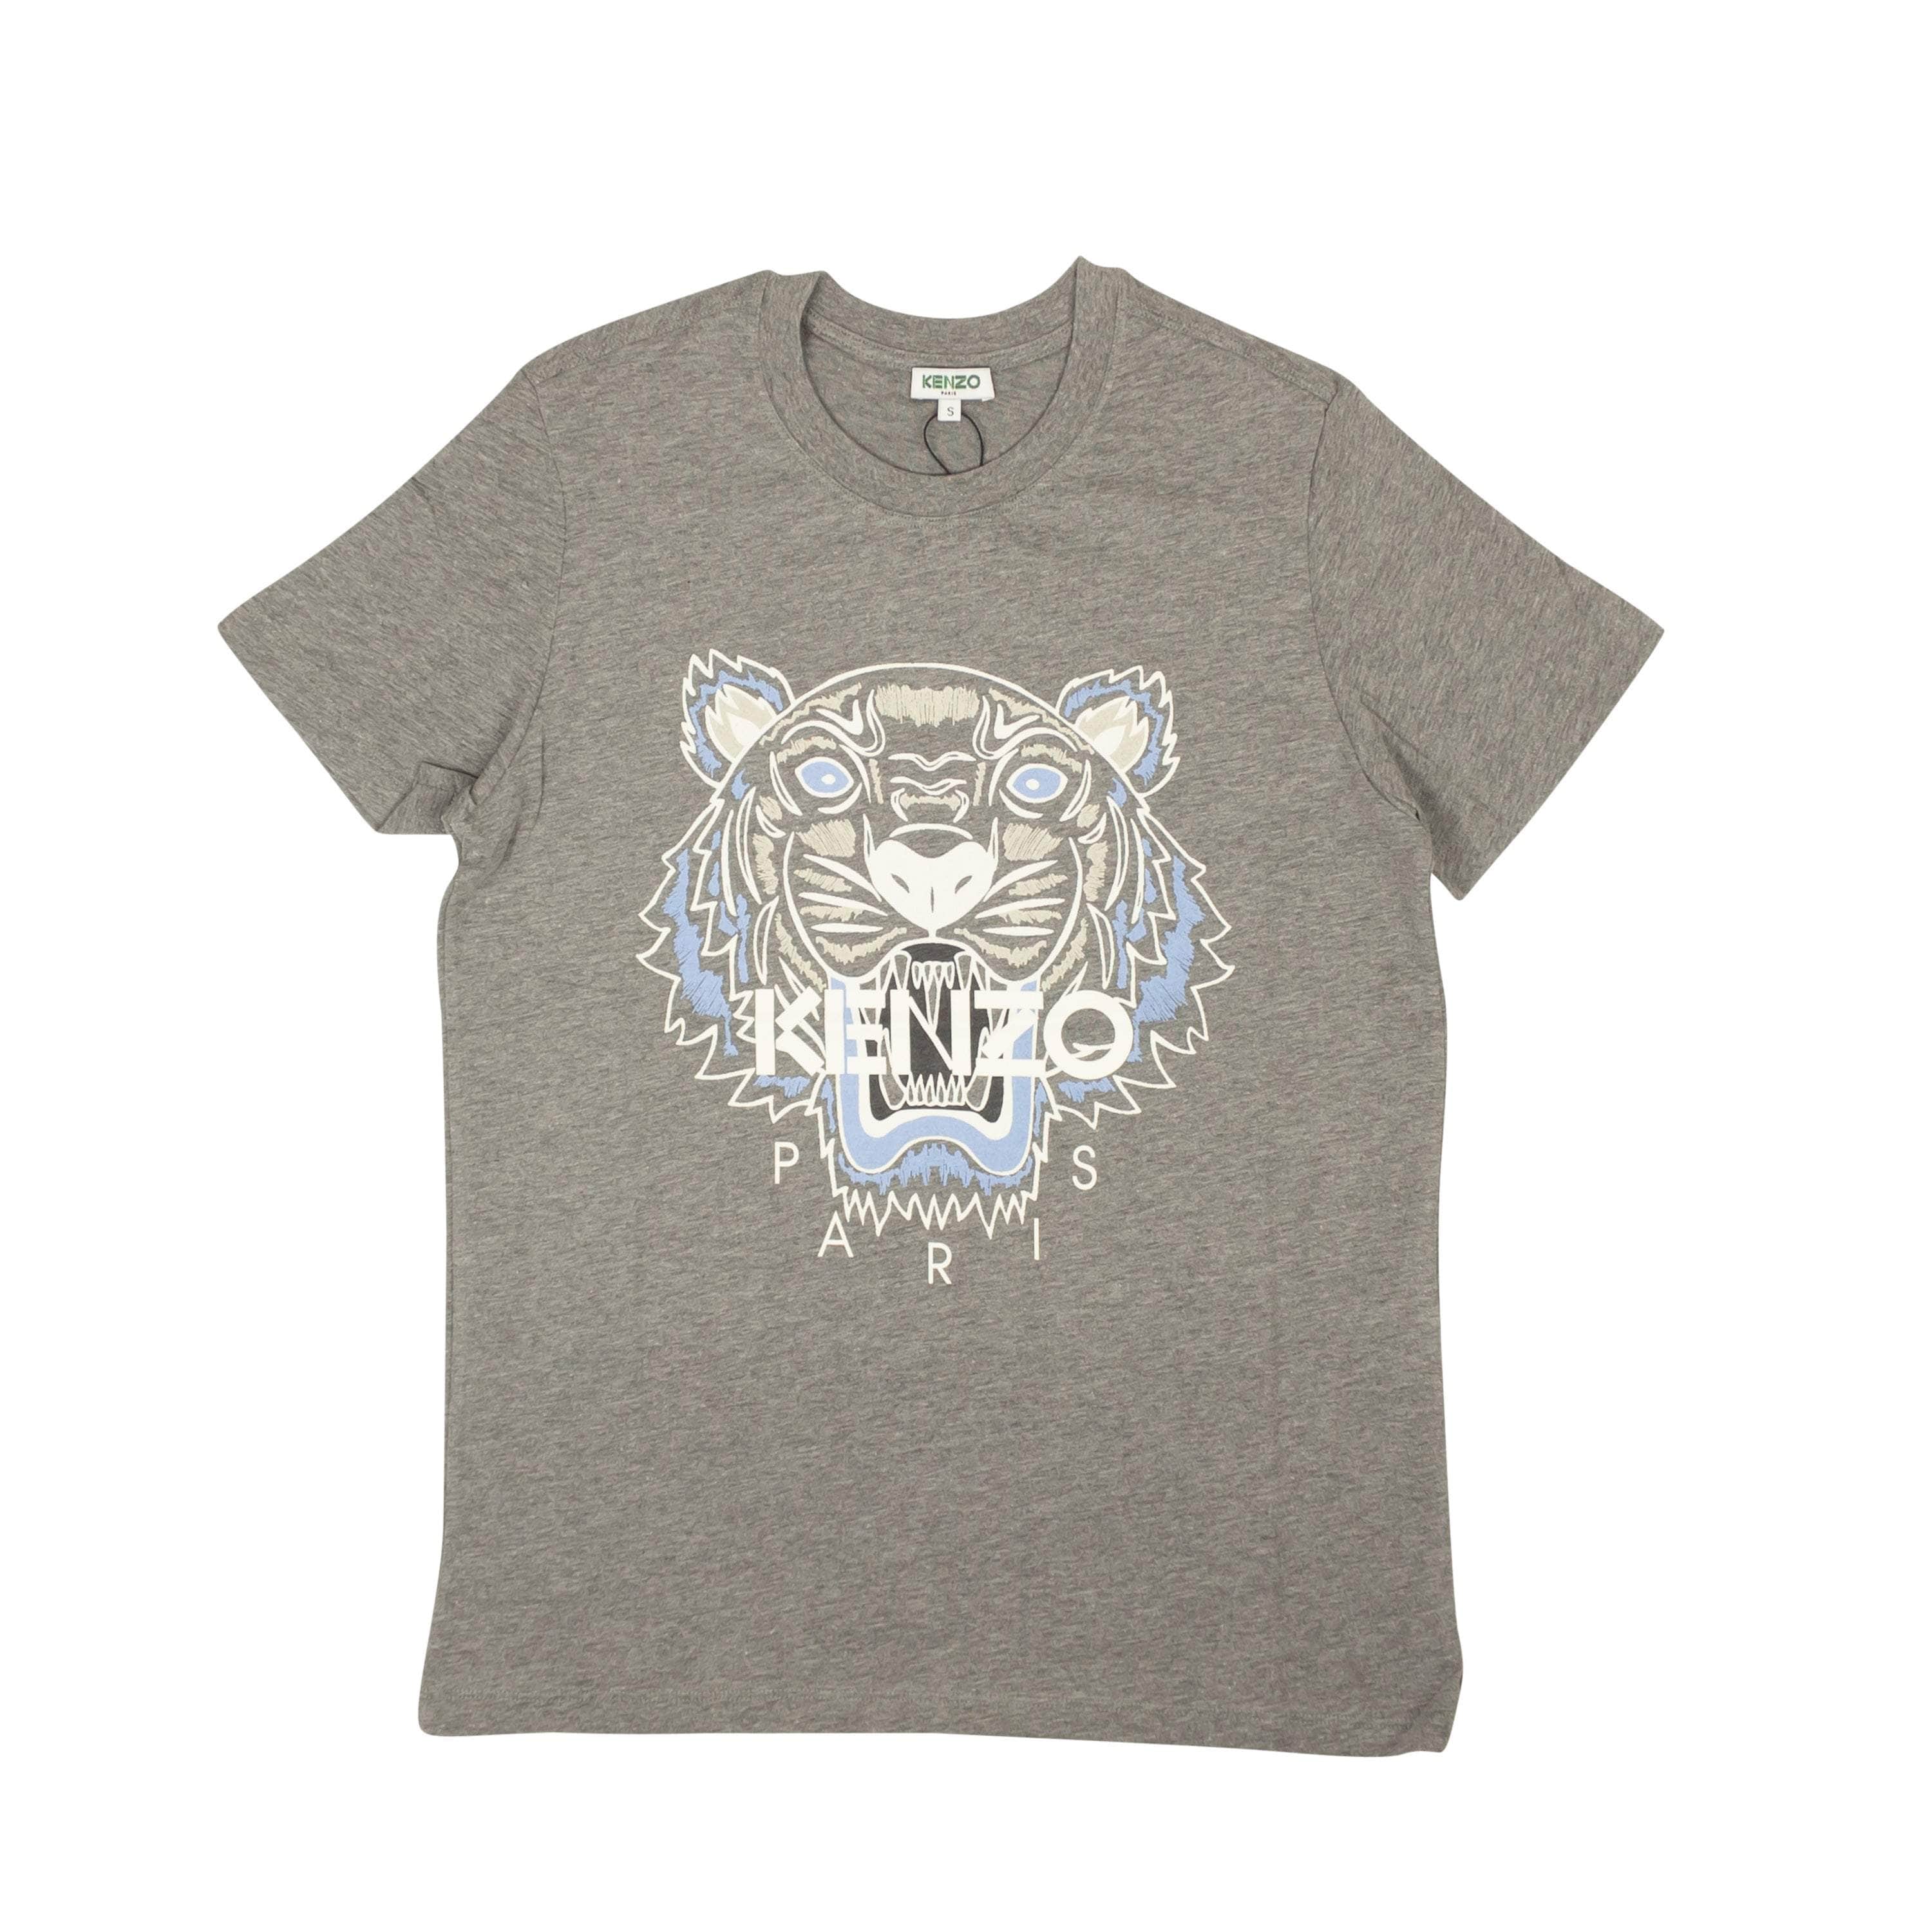 Kenzo Paris channelenable-all, chicmi, couponcollection, gender-mens, kenzo-paris, main-clothing, mens-shoes, size-l, size-m, size-s, size-xl, under-250 Grey Classic Tiger Short Sleeve T-Shirt